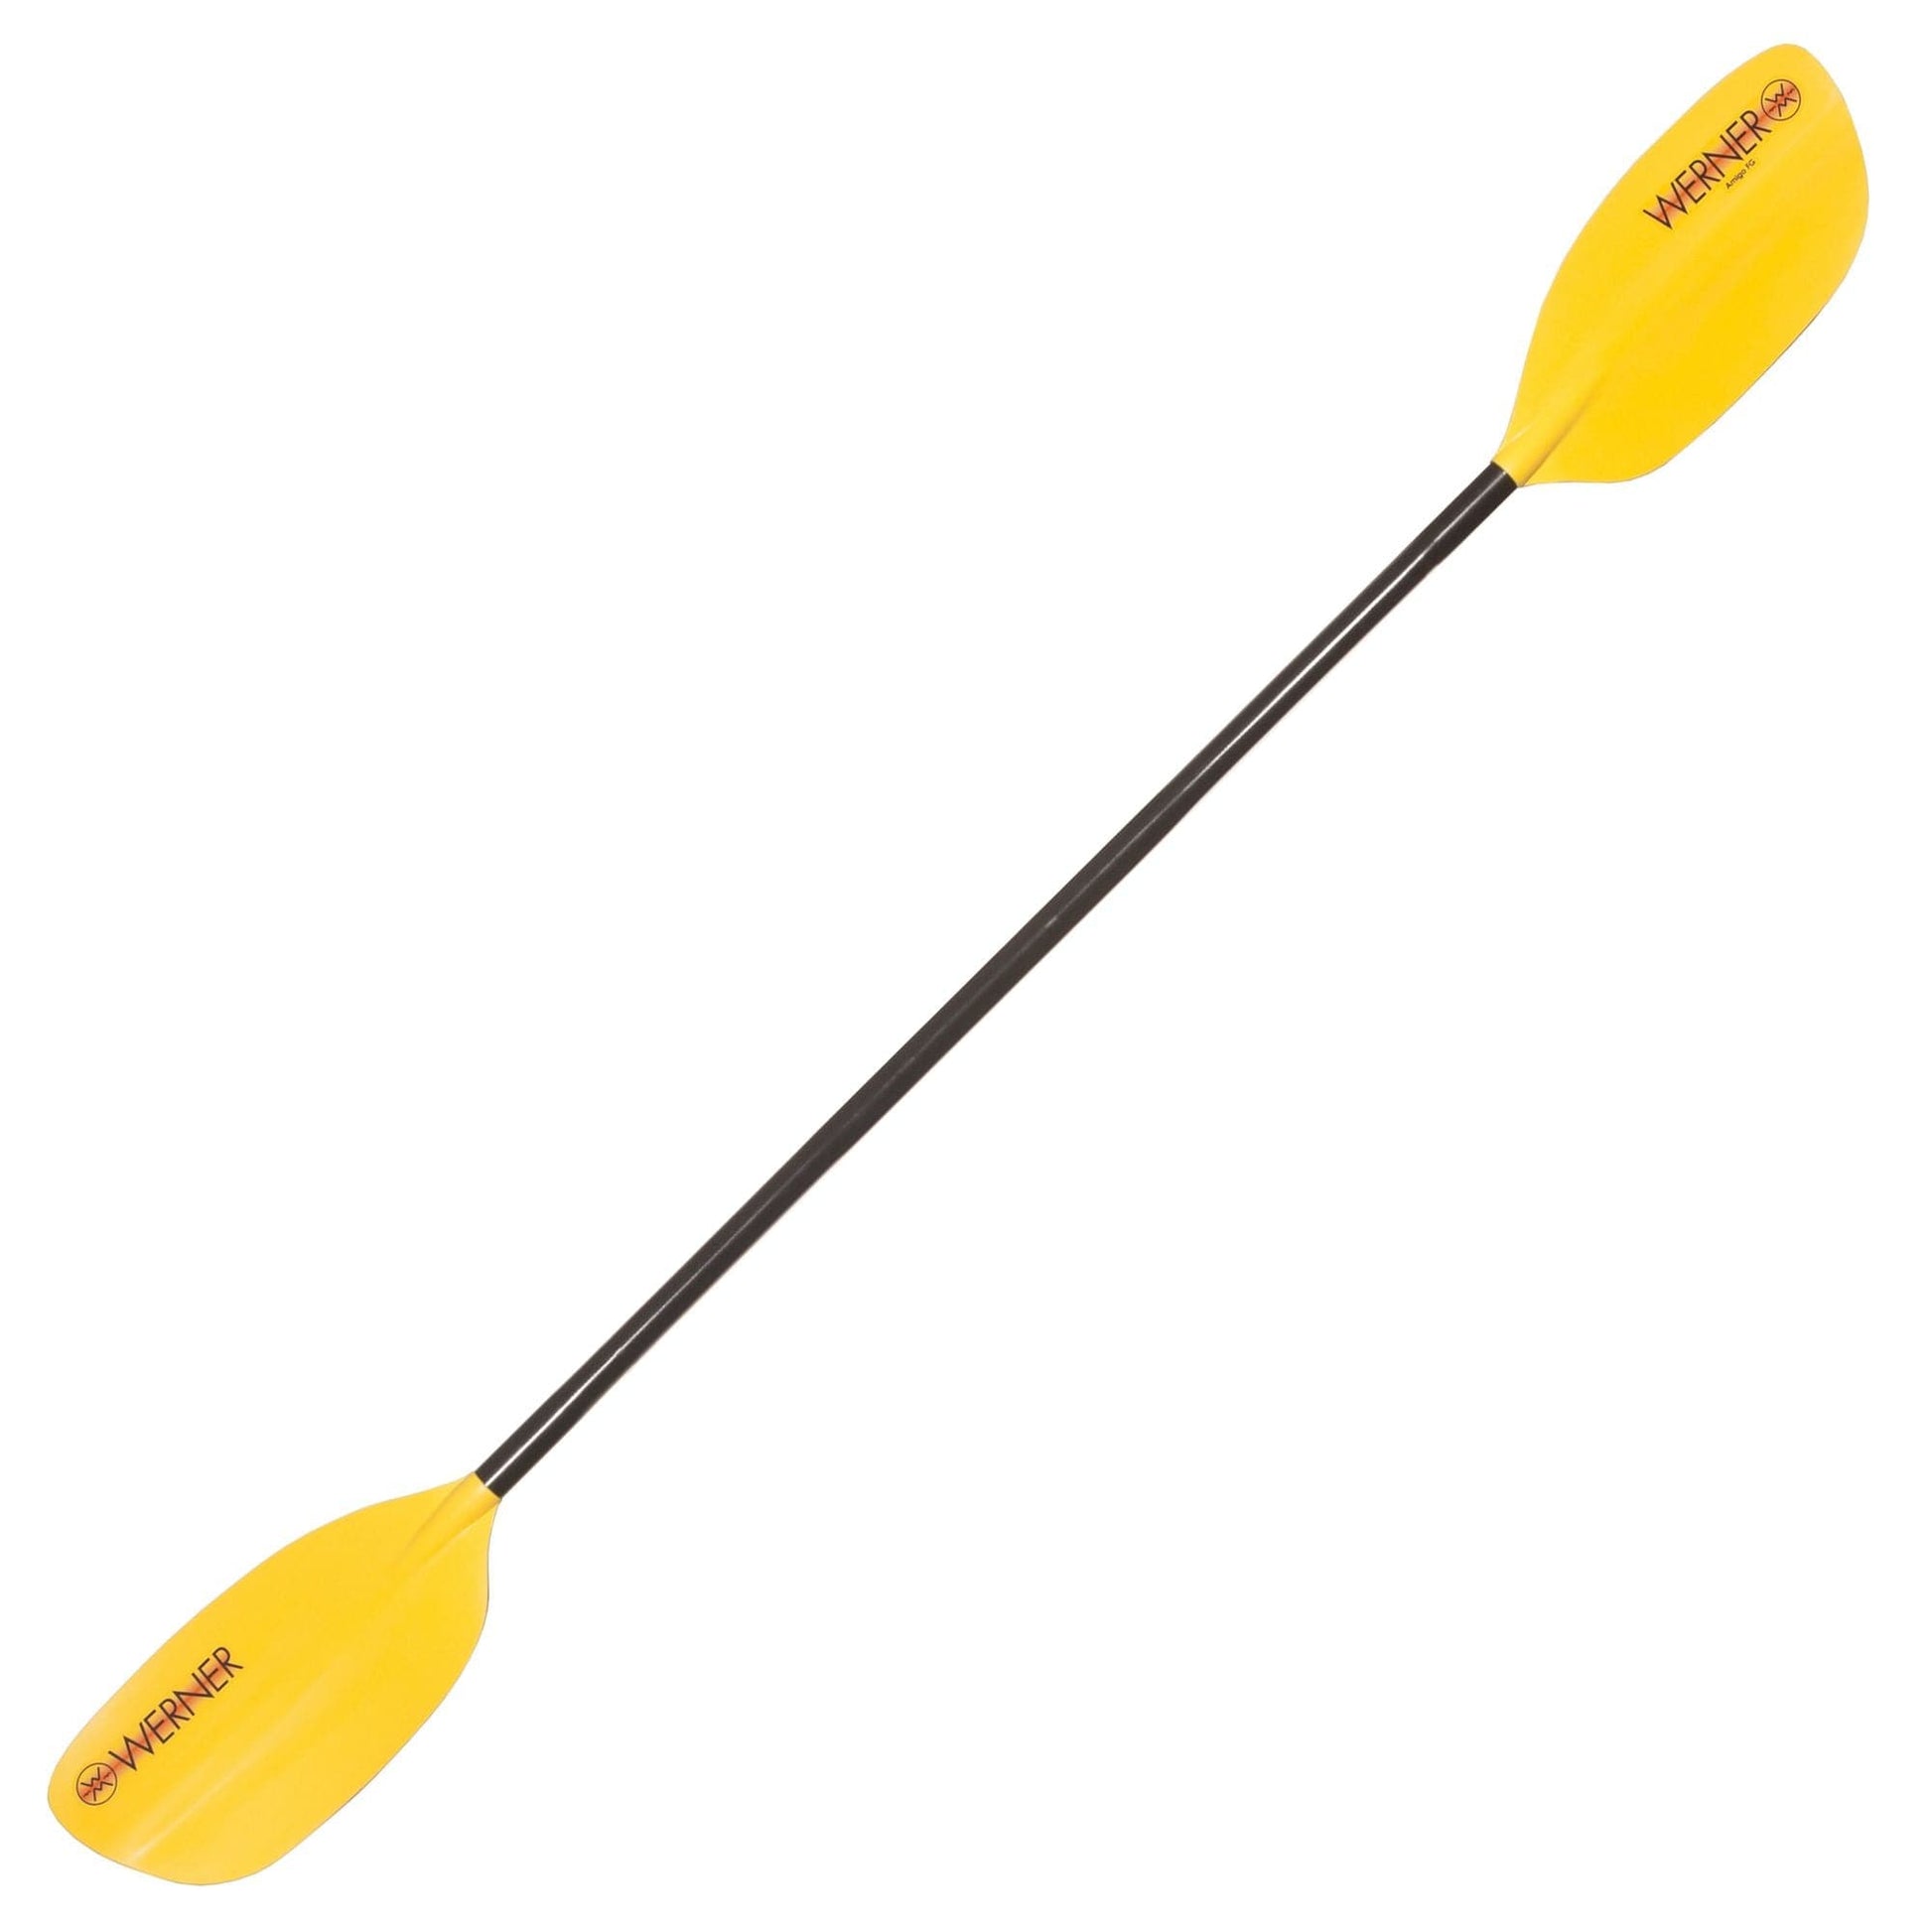 Featuring the Amigo entry level whitewater paddle, gift for kid, kid's paddle manufactured by Werner shown here from a second angle.